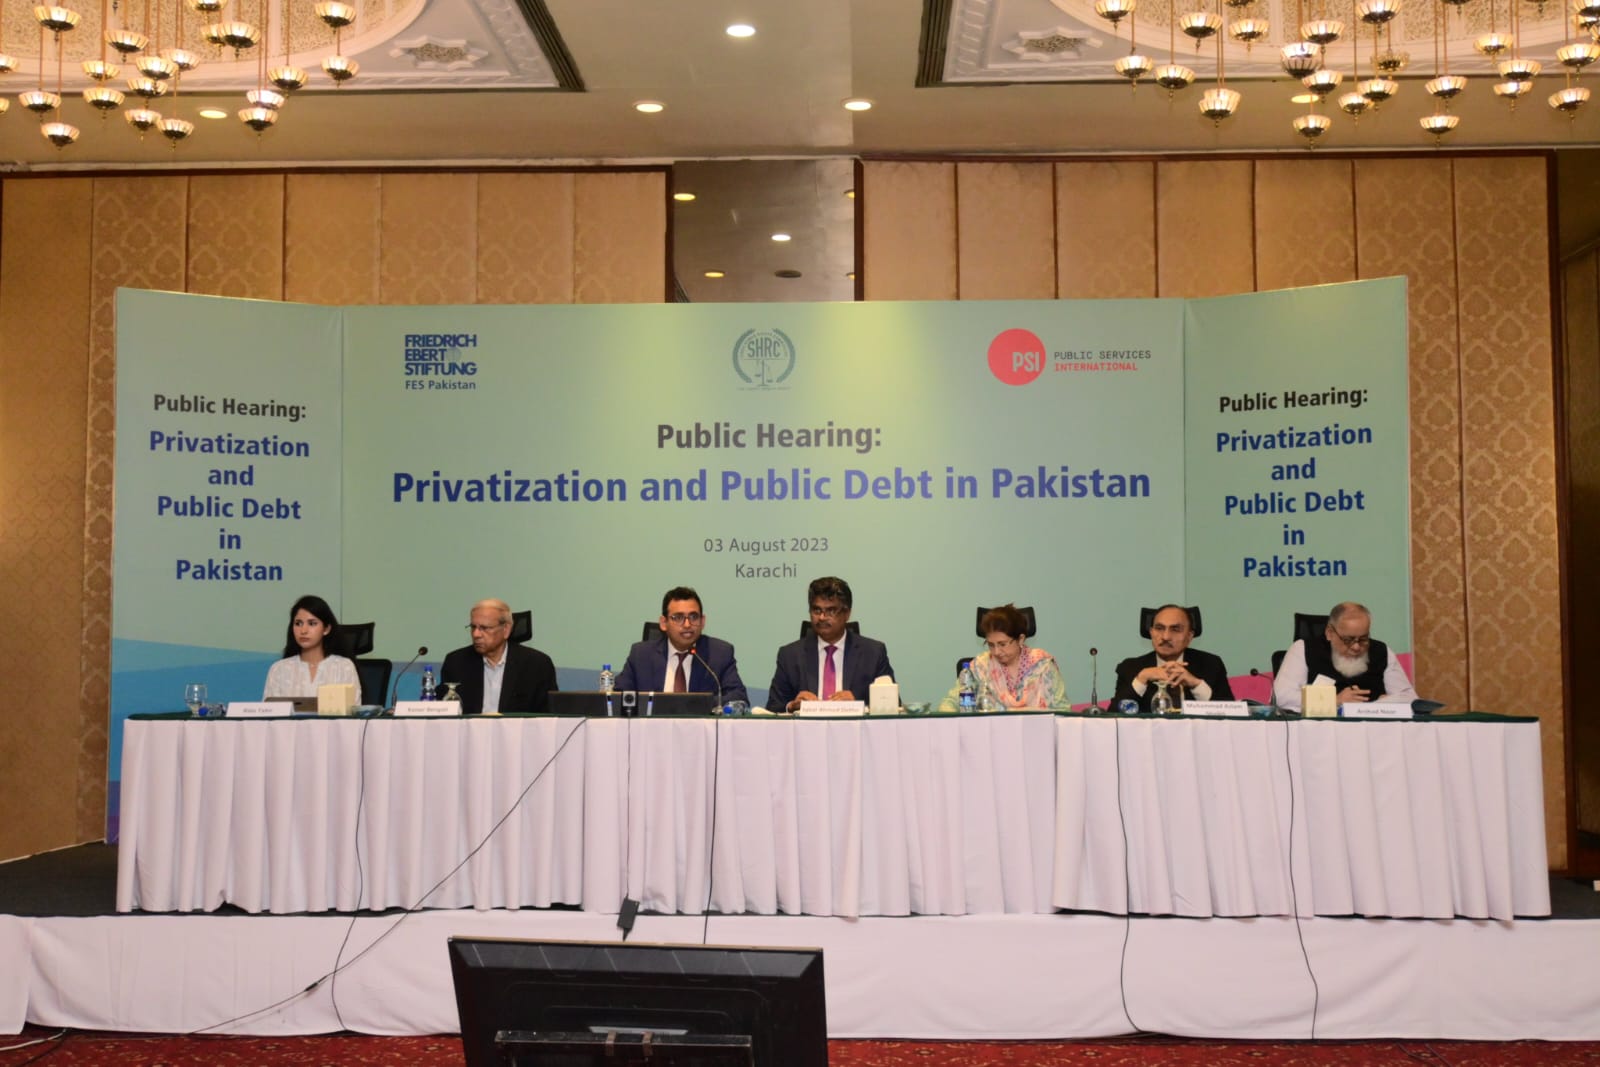 Powerful Voices Unite Against Unplanned Privatization: FES Pakistan Hosts Landmark Public Hearing on Workers’ Rights and Human Welfare in Pakistan, in collaboration with PSI and SHRC.